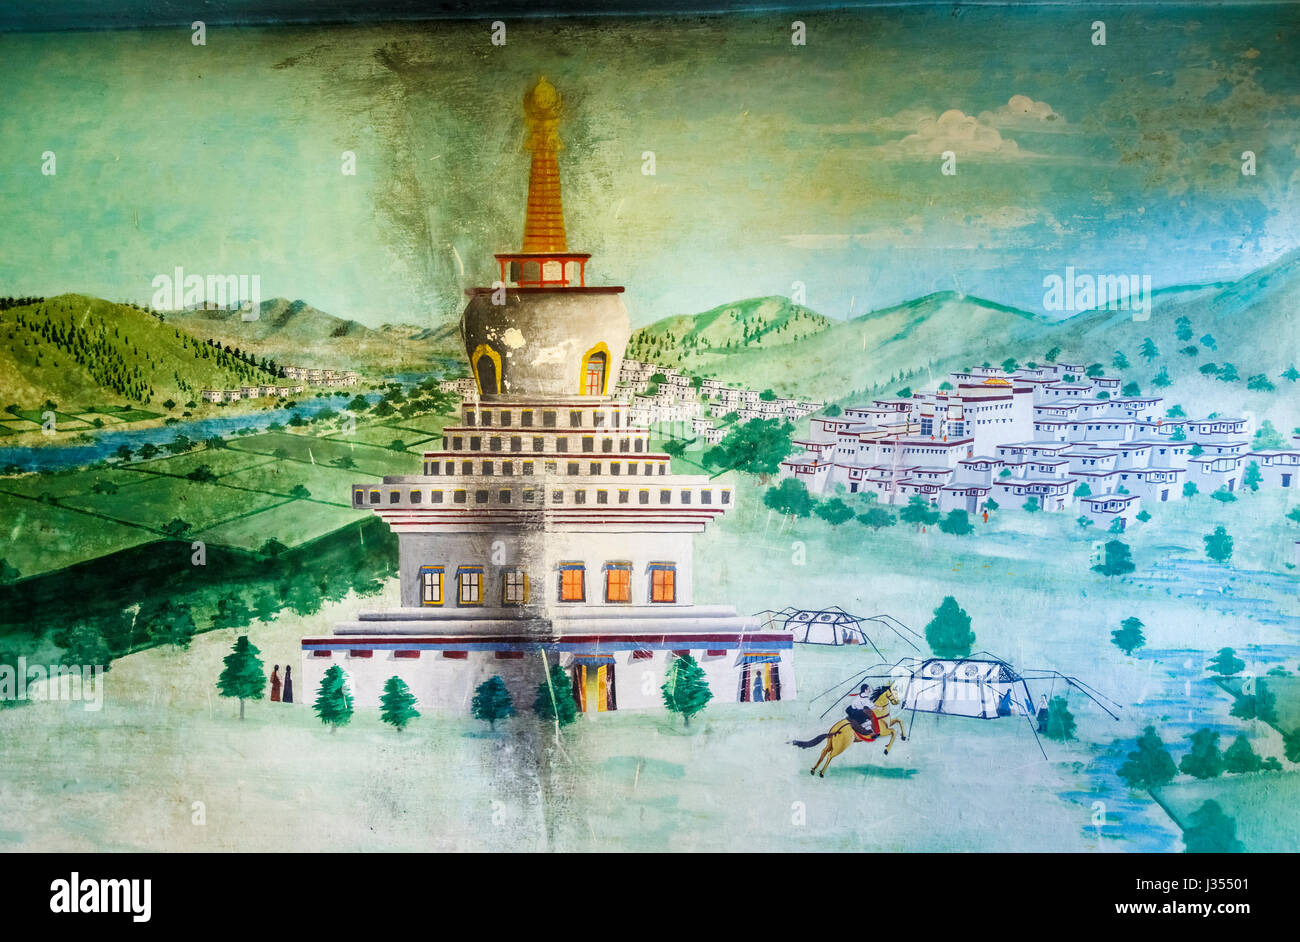 Damaged wall painting in Chonor House Hotel, McLeodGanj, Dharamshala, Himachal Pradesh, north India depicting traditional Tibetan town and buildings Stock Photo